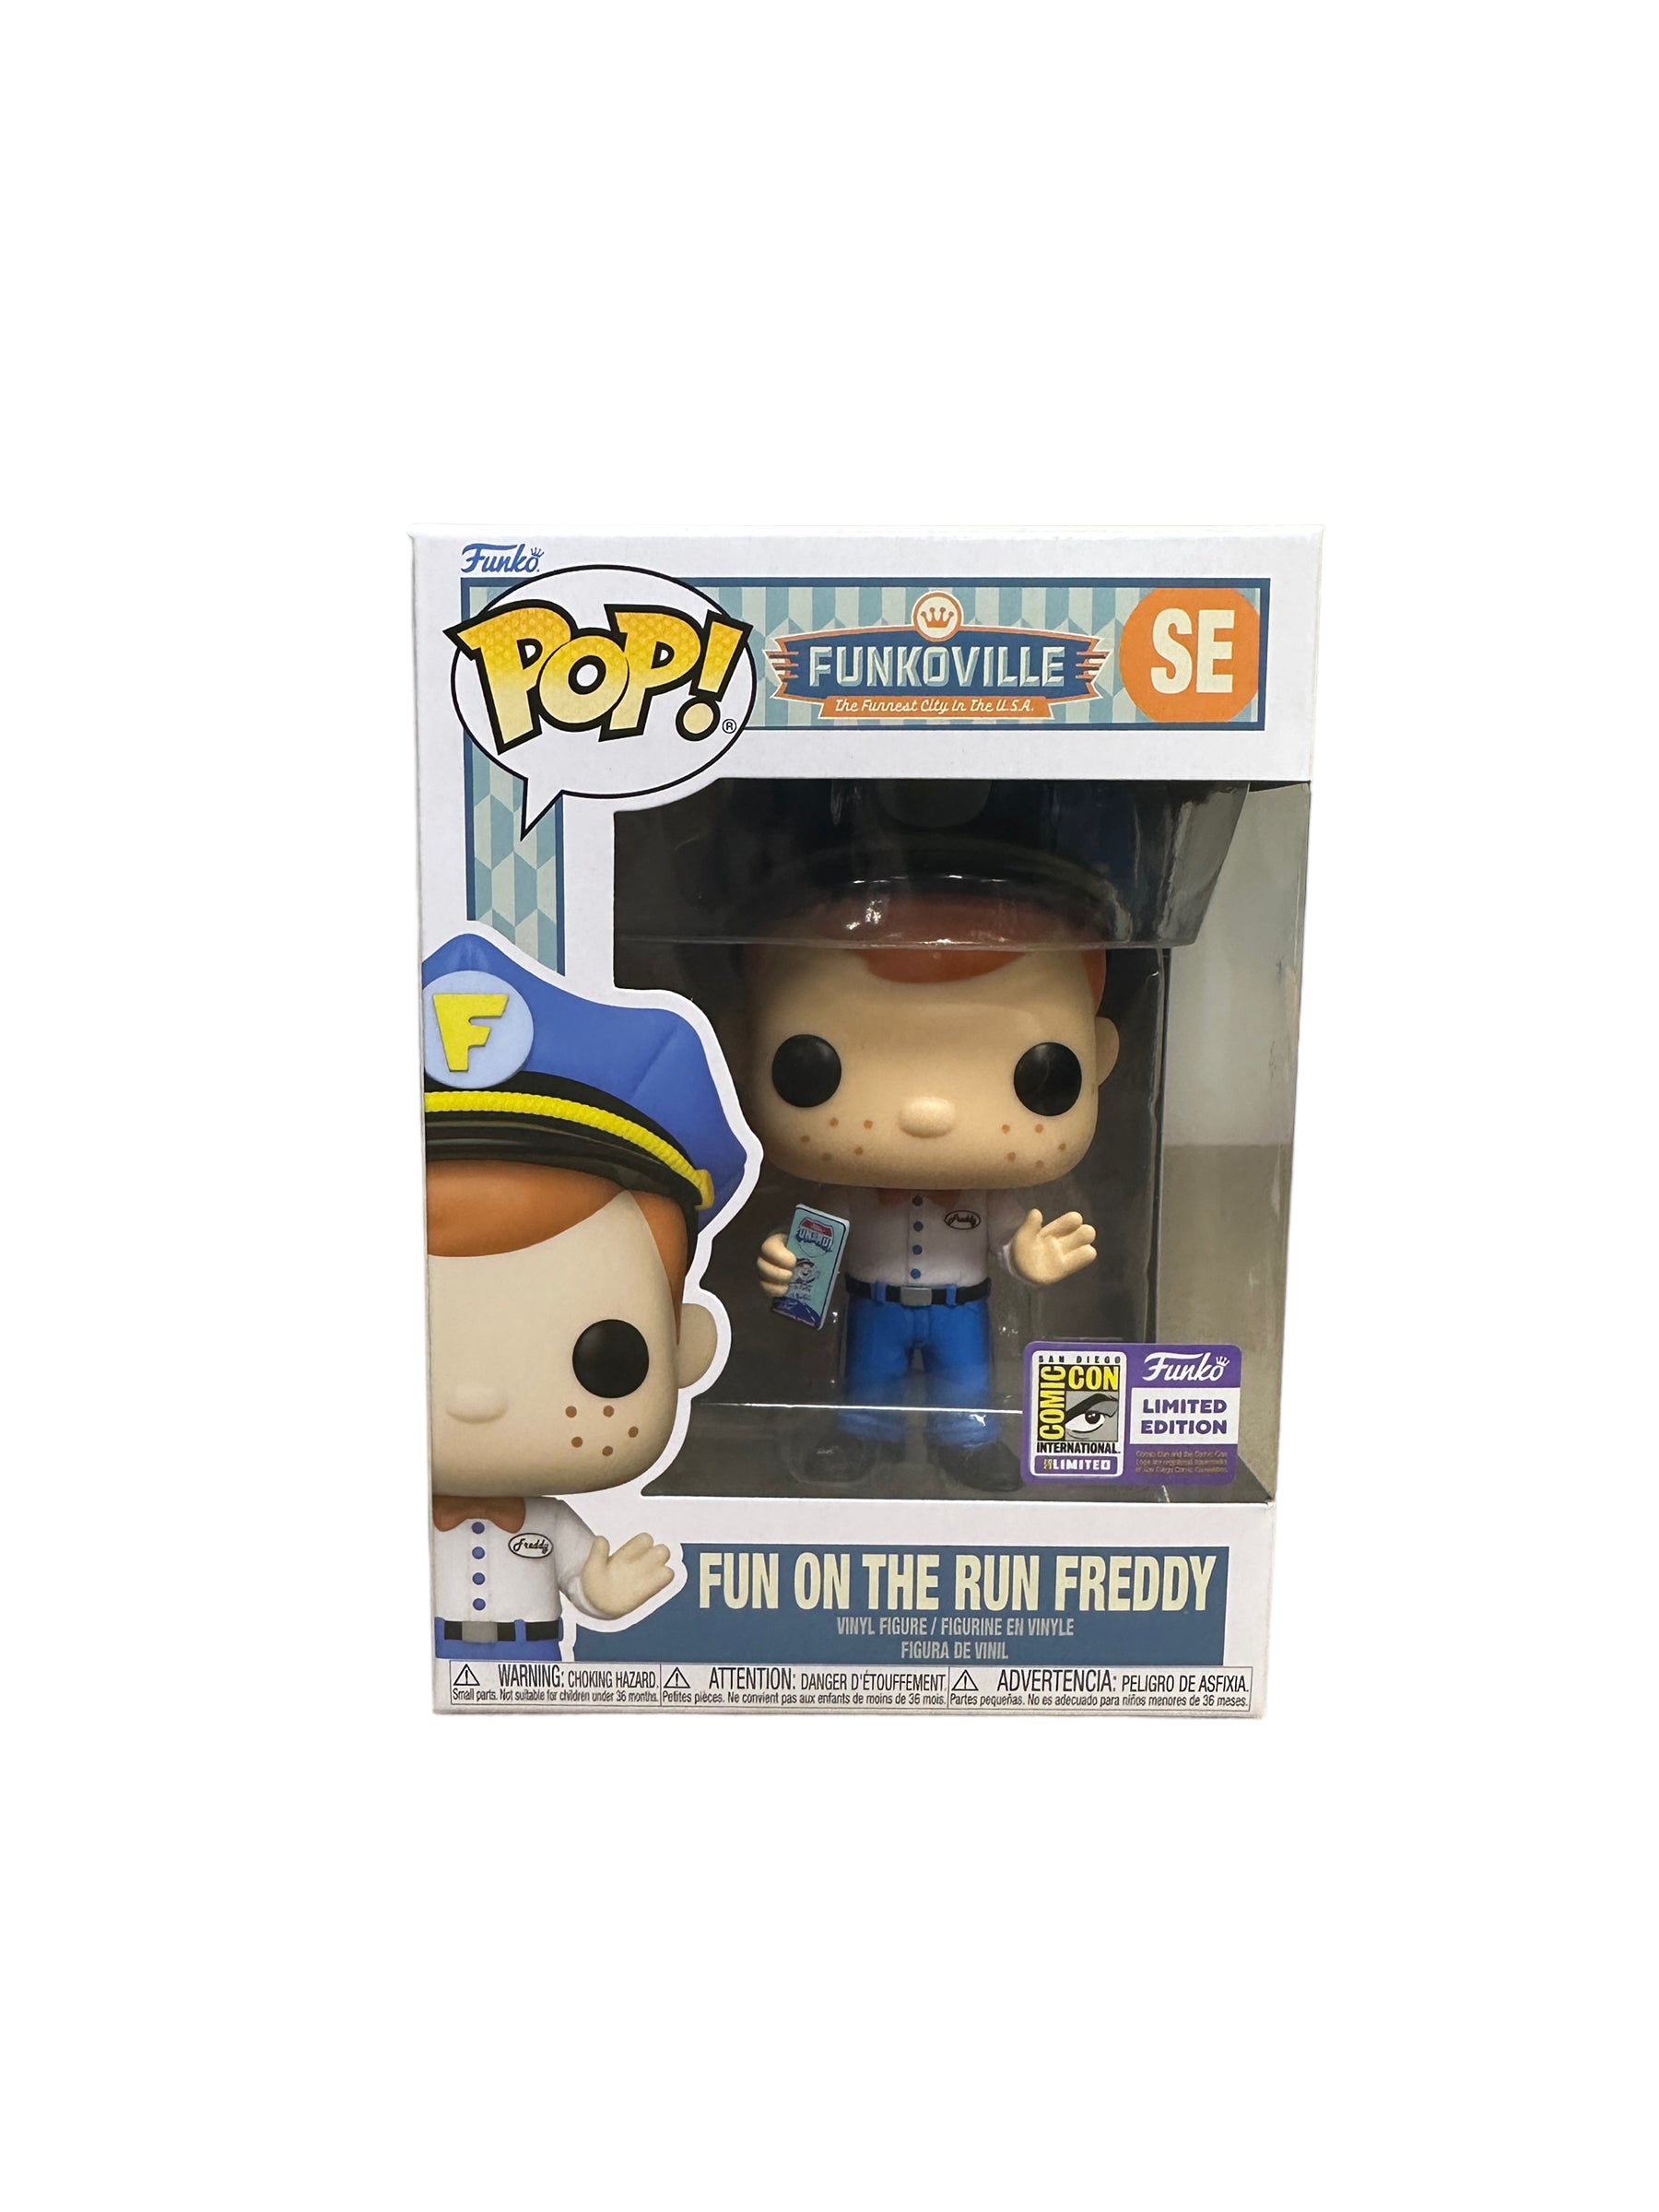 Fun on the Run Freddy Funko Pop! - Funkoville - SDCC 2023 Official Convention Exclusive - Condition 9/10